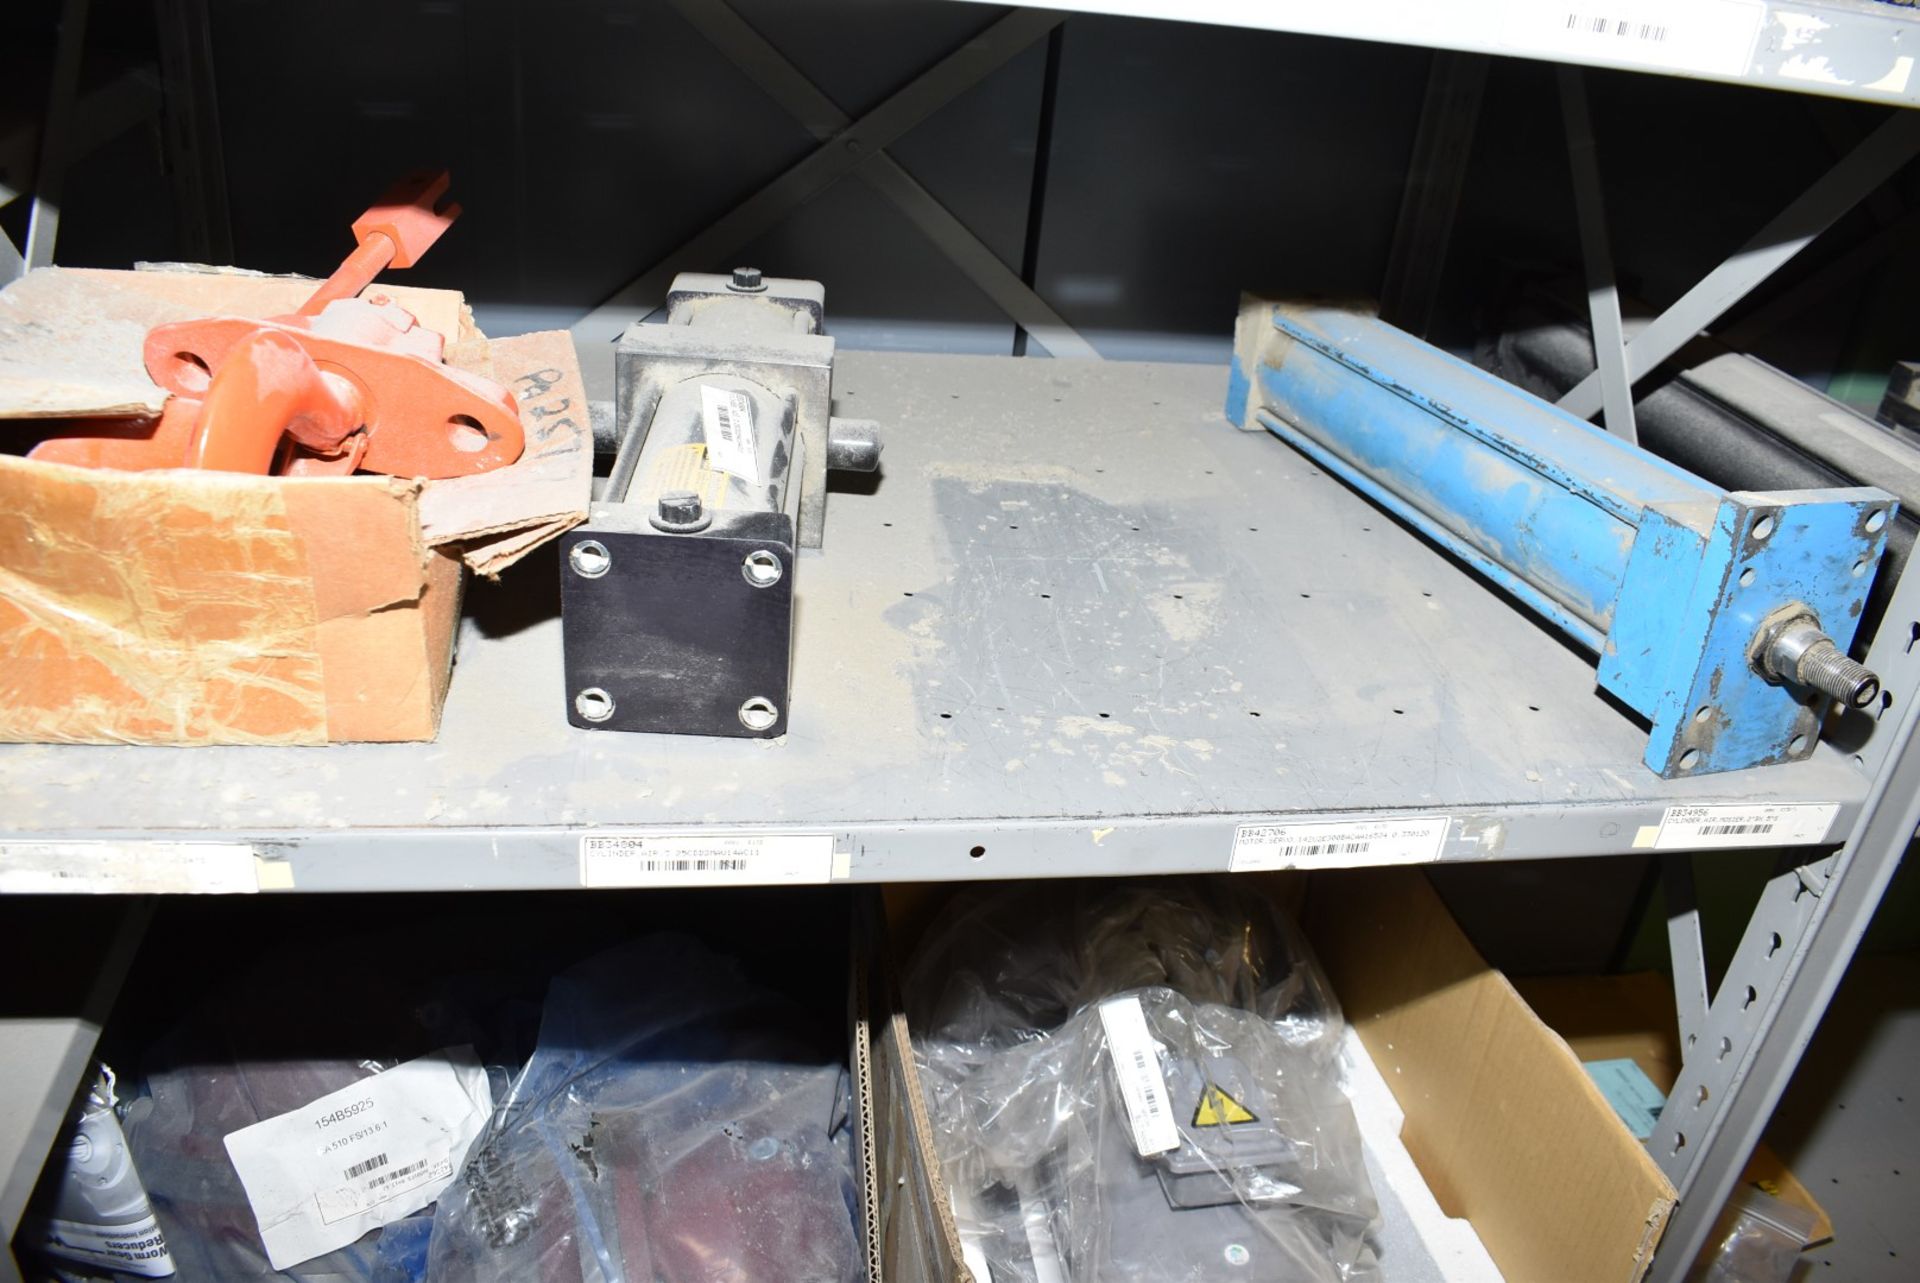 LOT/ CONTENTS OF SHELF - INCLUDING CONVEYOR ROLLERS, AIR CYLINDERS, VACUUM PUMP, SPARE PARTS [ - Image 4 of 5